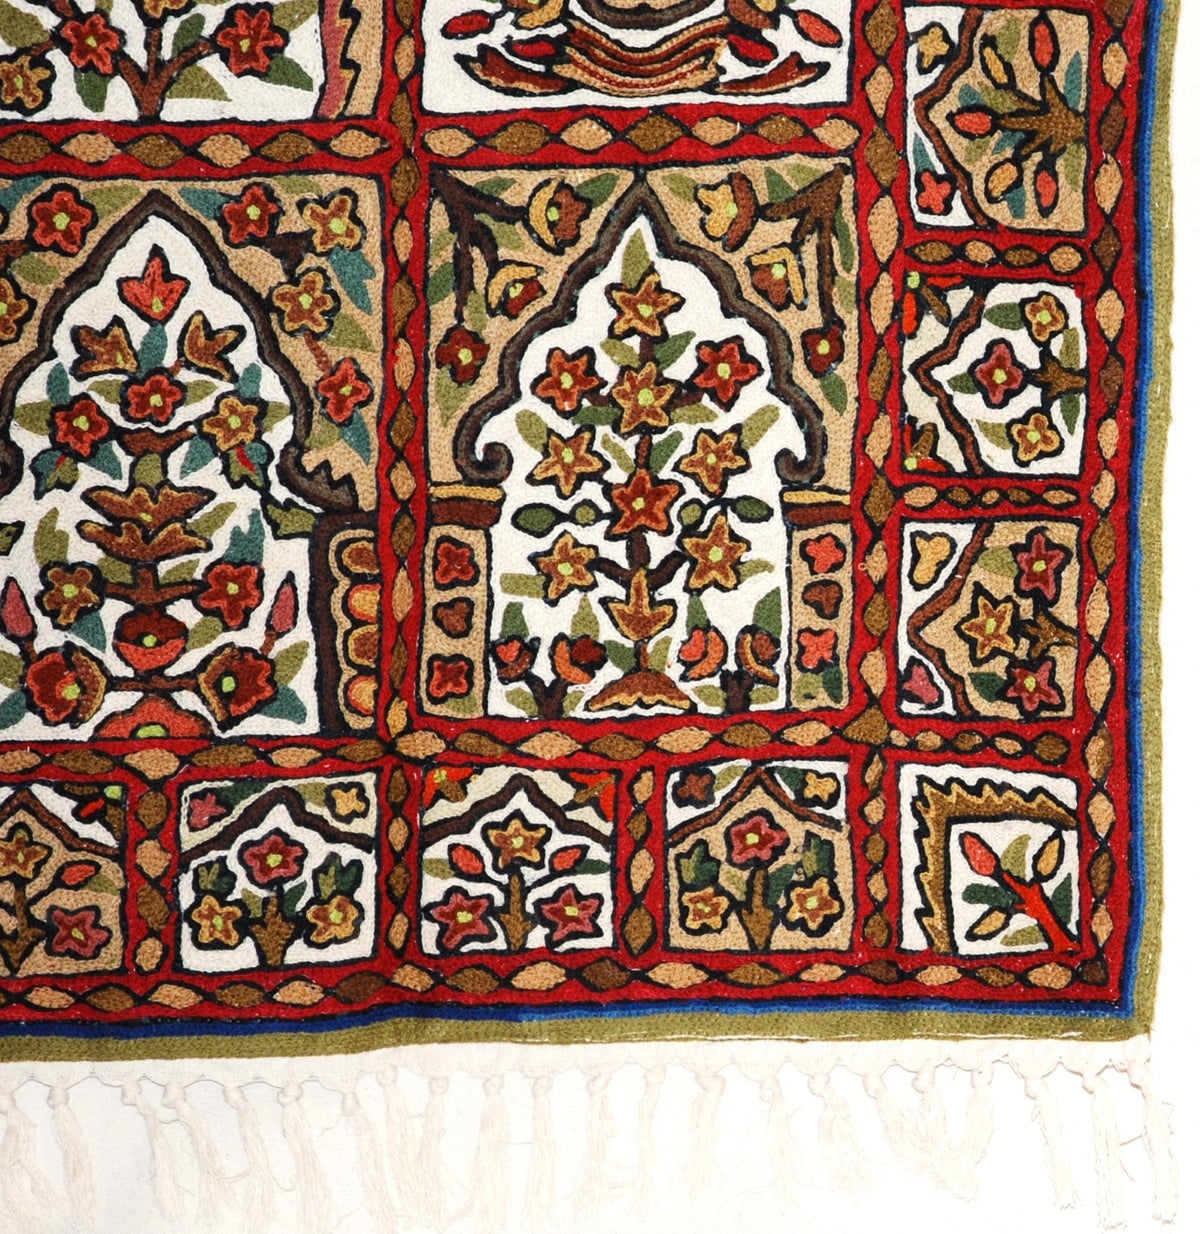 https://www.bigprostore.shop/wp-content/uploads/1700/45/explore-handmade-tapestry-woolen-area-rug-multicolor-embroidery-2-5x4-feet-cwr10017-best-of-kashmir-shop-online-and-many-more-visit-us-and-get-discounts_2.jpg